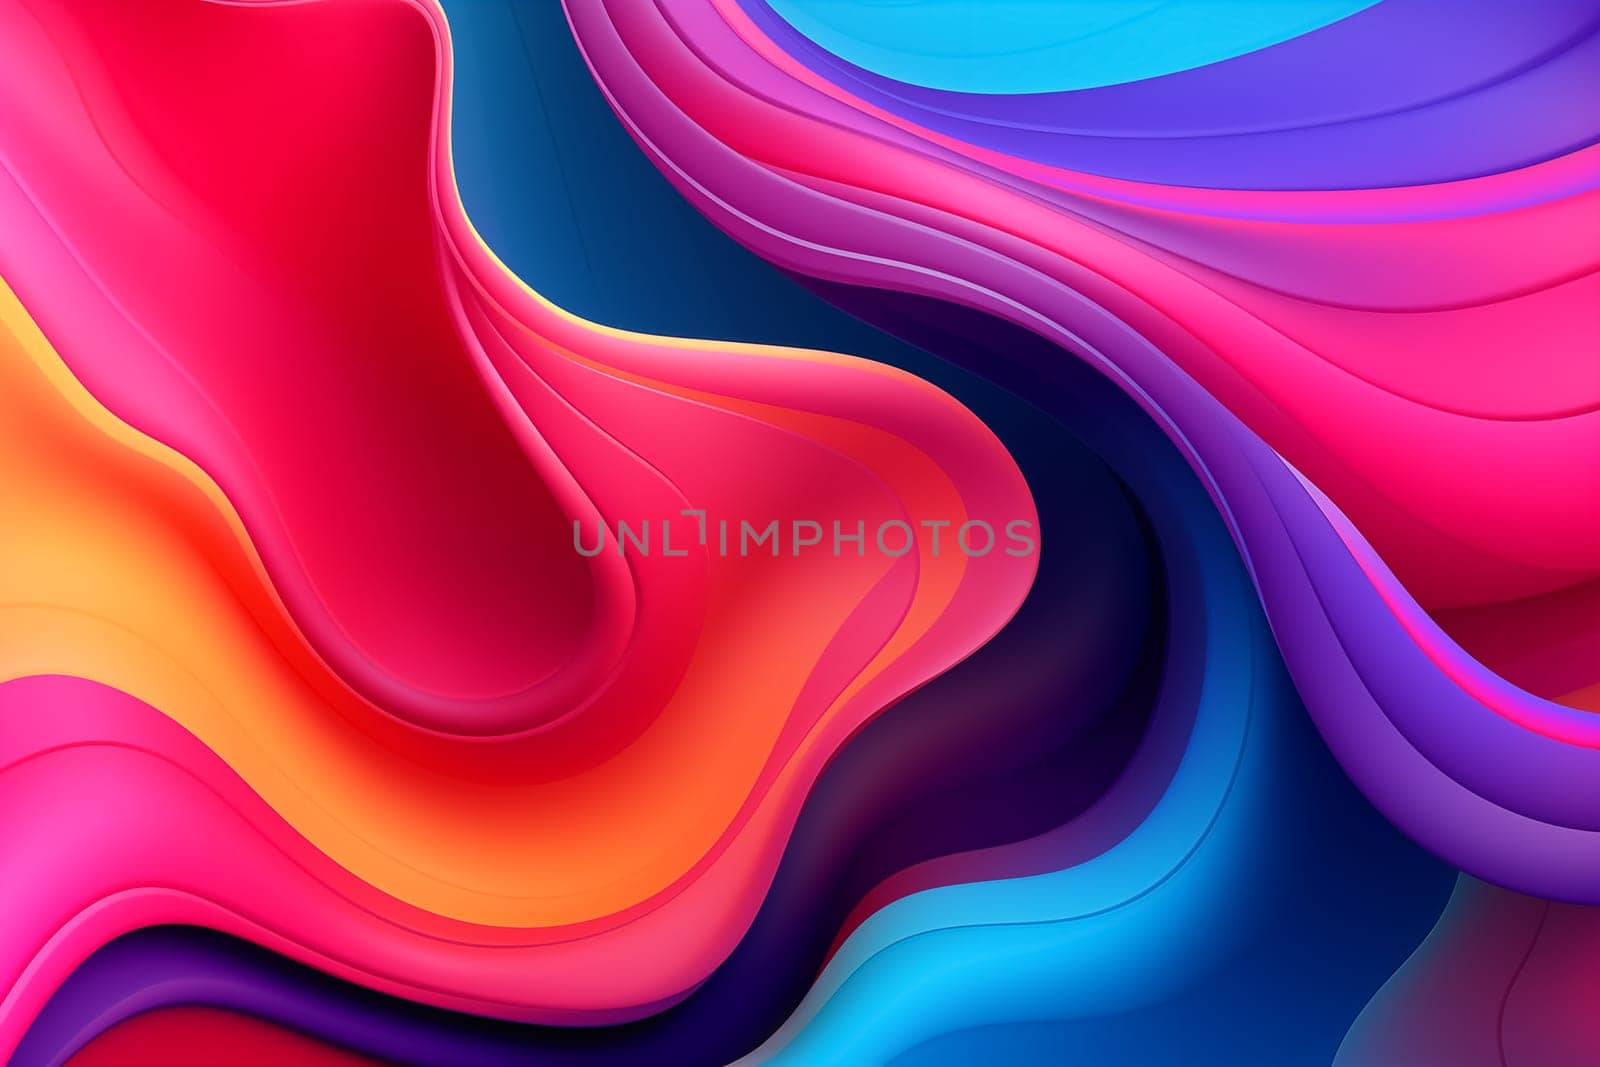 Abstract fluid background design. liquid color trendy backdrop. High quality photo